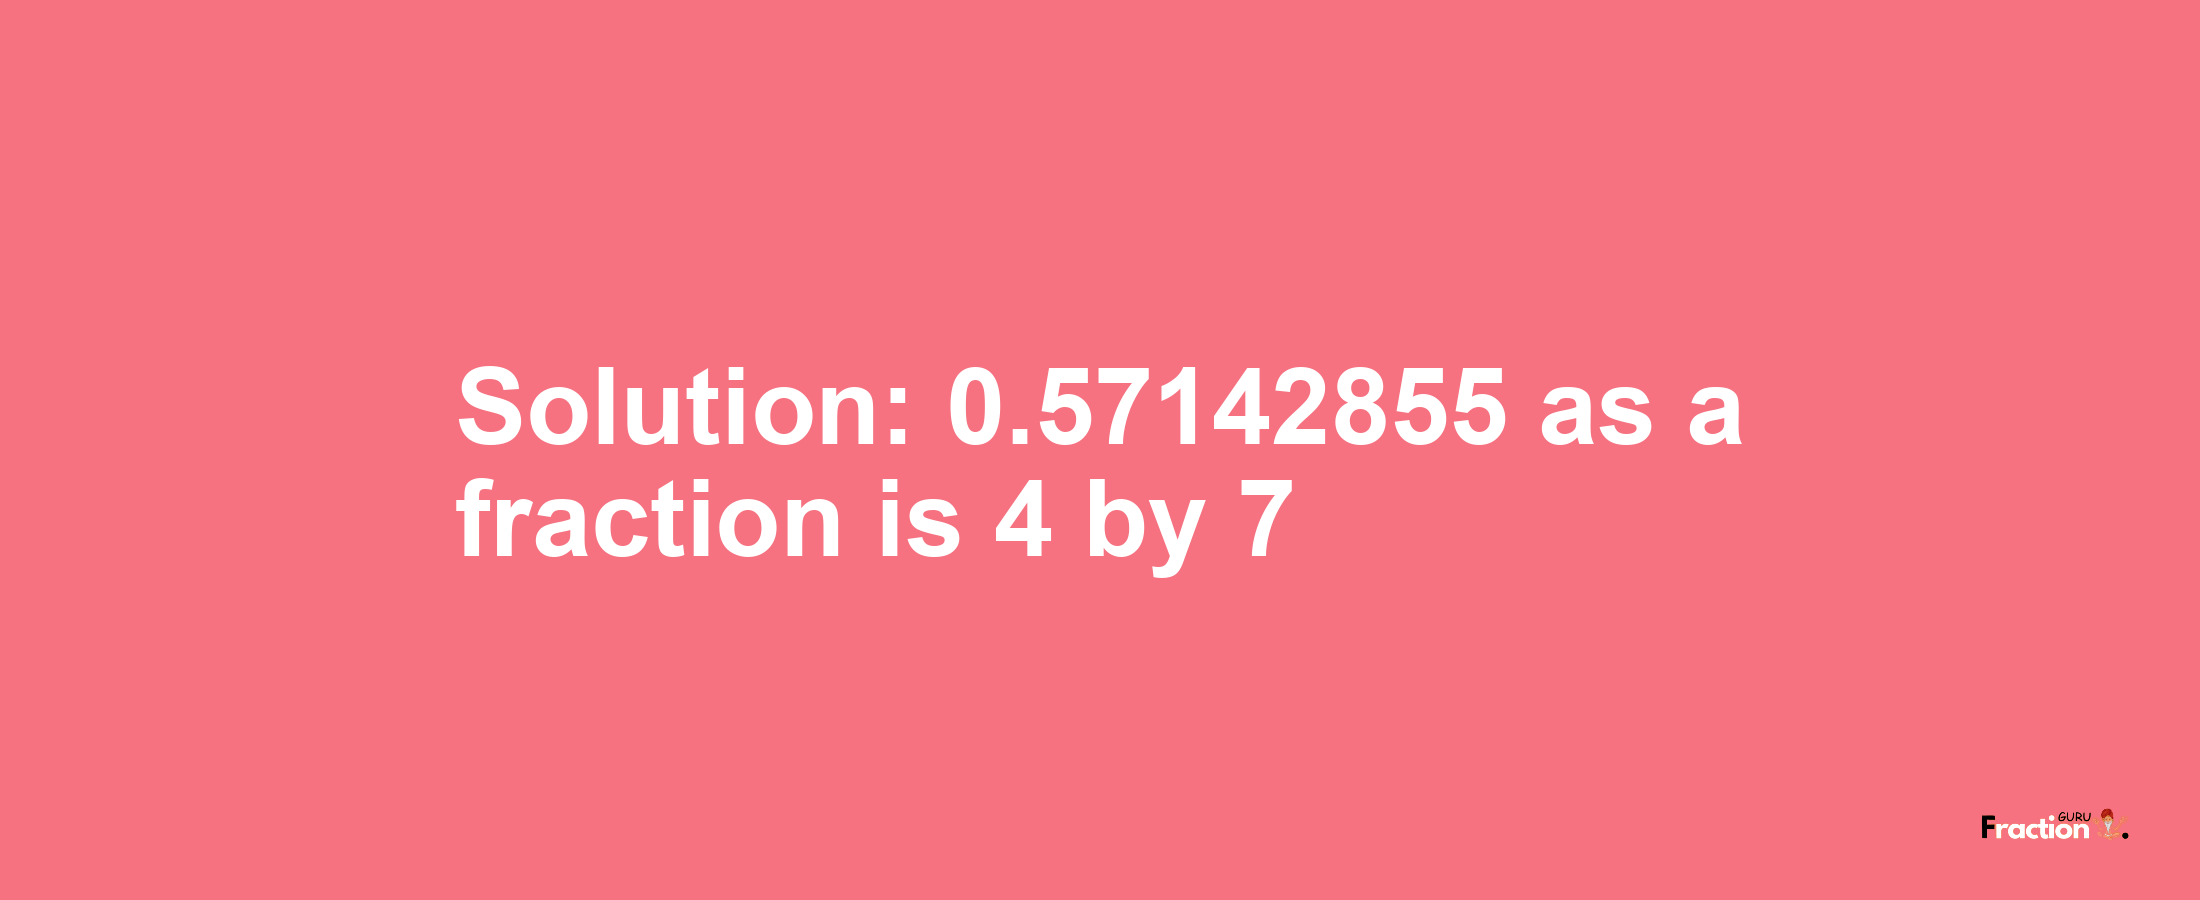 Solution:0.57142855 as a fraction is 4/7